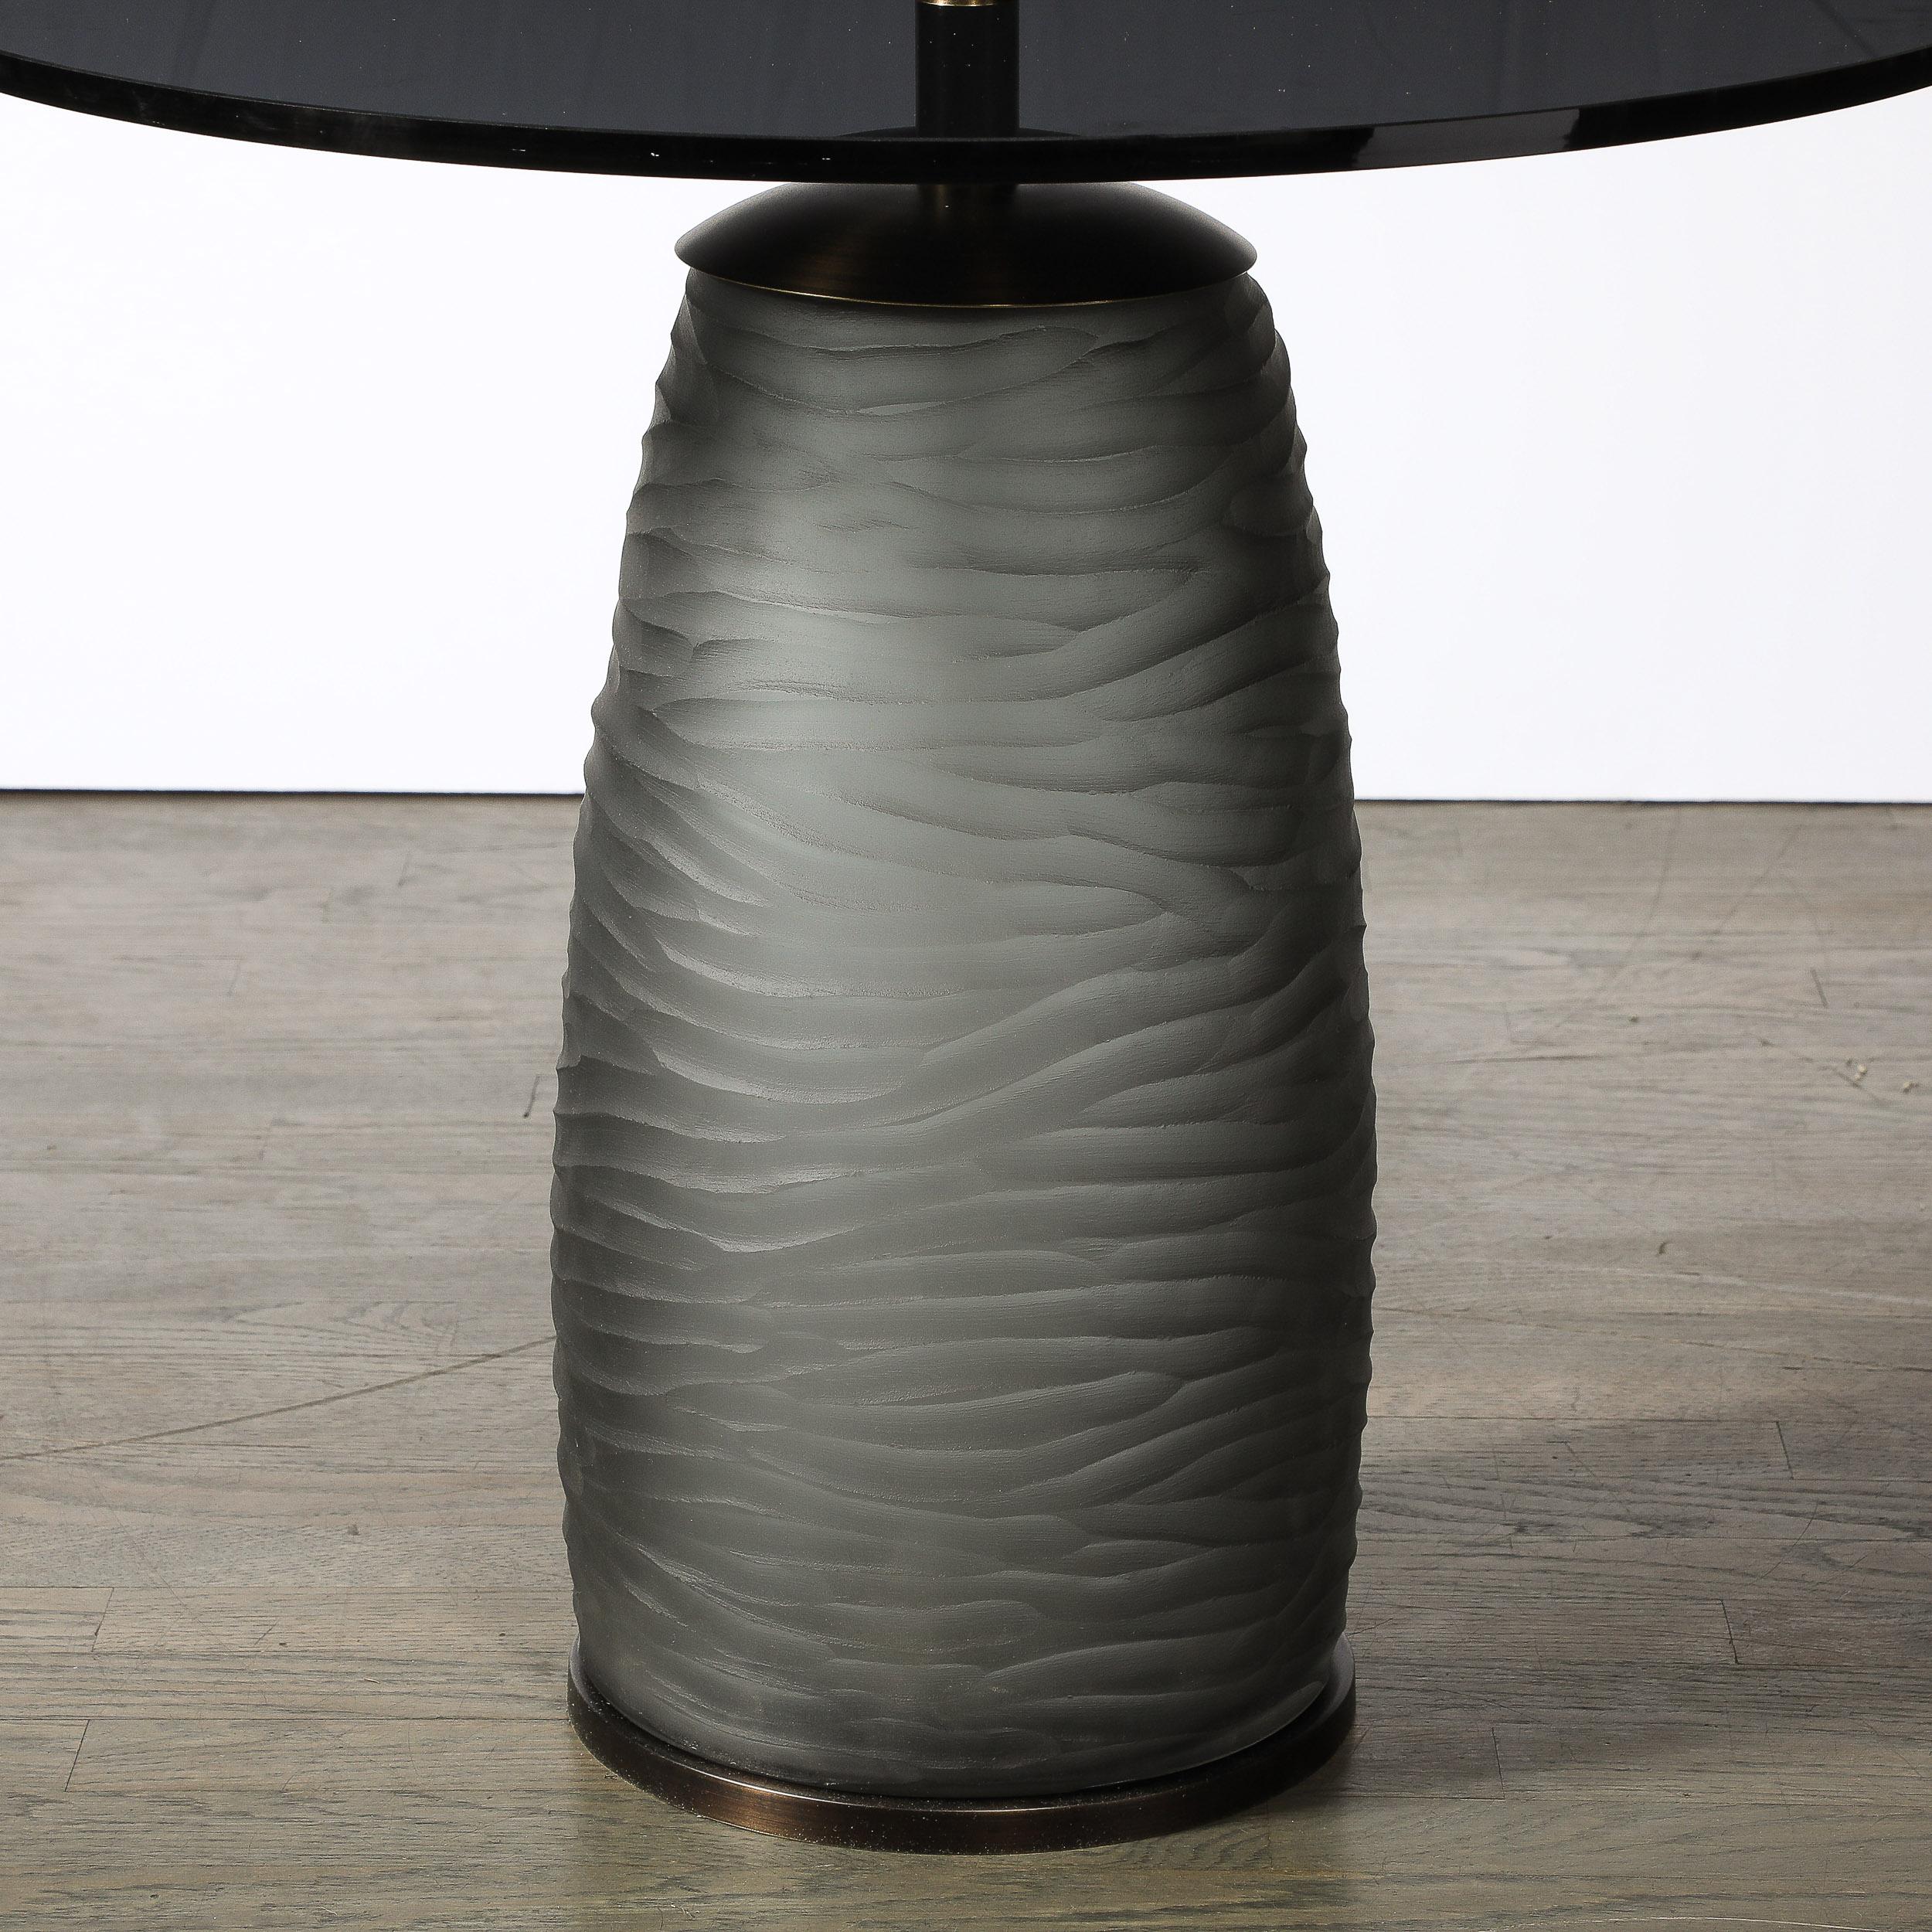 This striking and materially exquisite Modernist Hand-Blown Murano Smoked Battuto Glass Side/End Table with Oil Rubbed Bronze Fittings is Custom for High Style Deco and originates from Italy during the 21st Century. Features a round smoked glass top